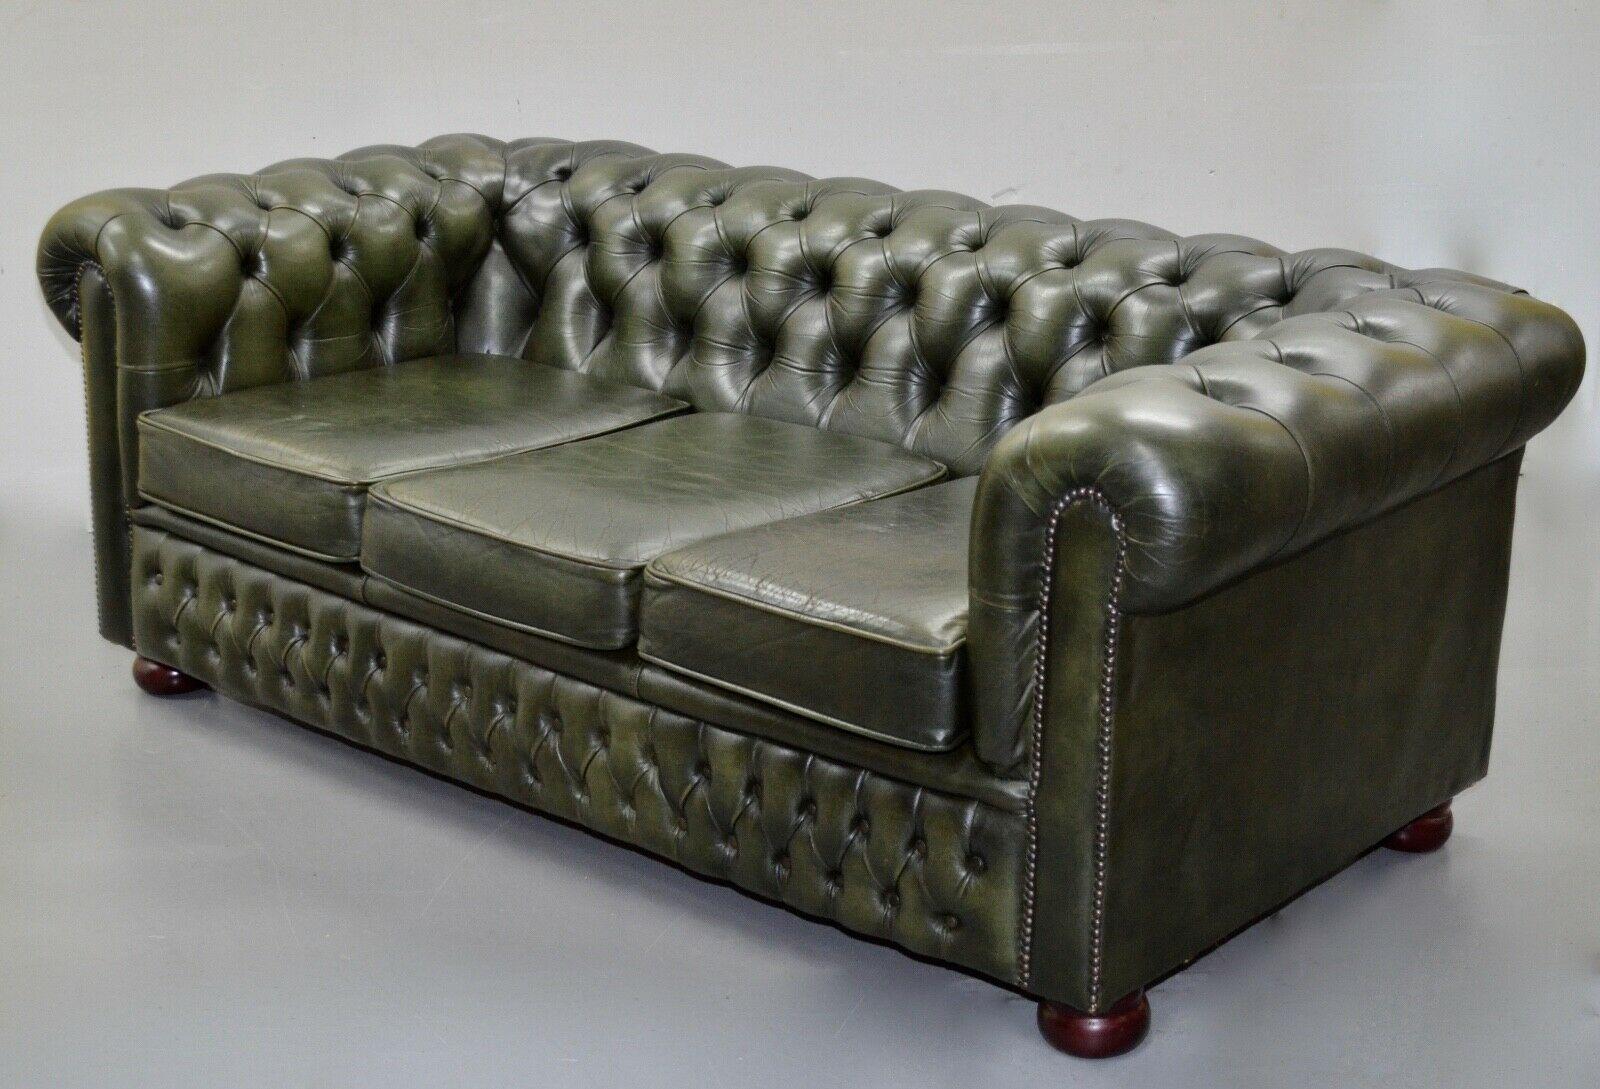 Hand-Crafted CHESTERFIELD 3 SEATER ANTiQUE OLIVE GREEN LEATHER SOFA